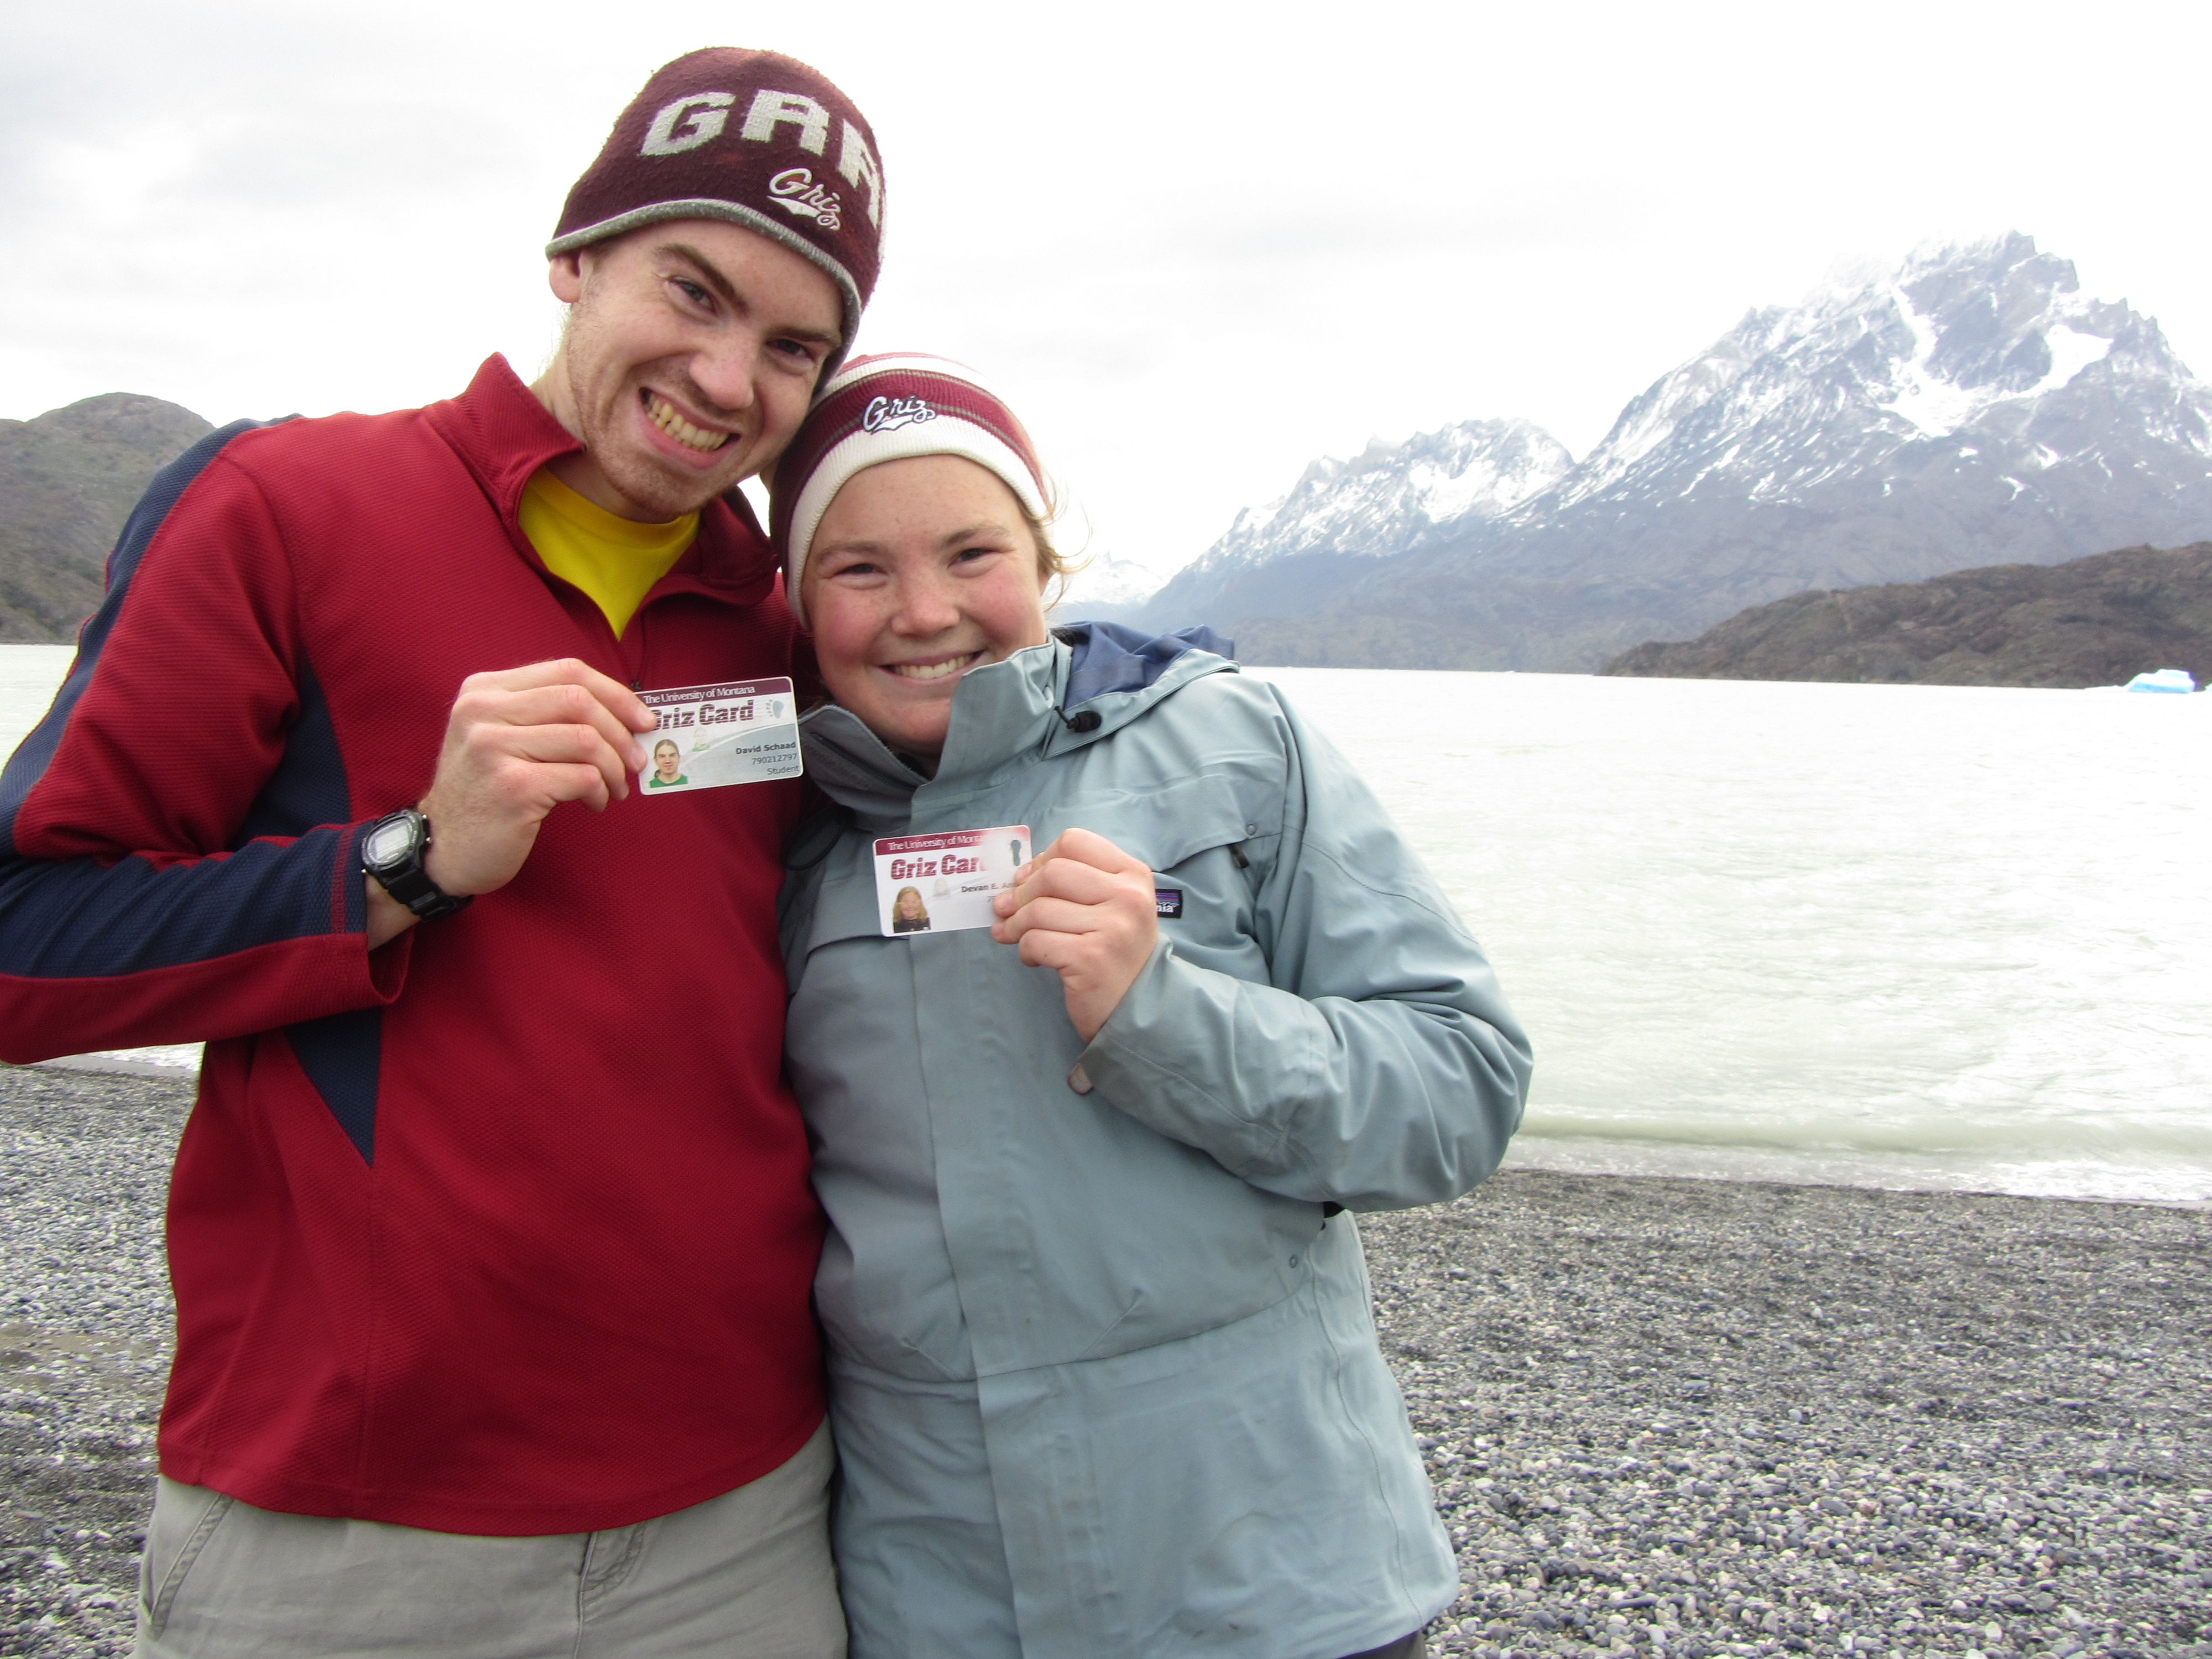 Two UM students pose in front of a mountain with their Griz cards